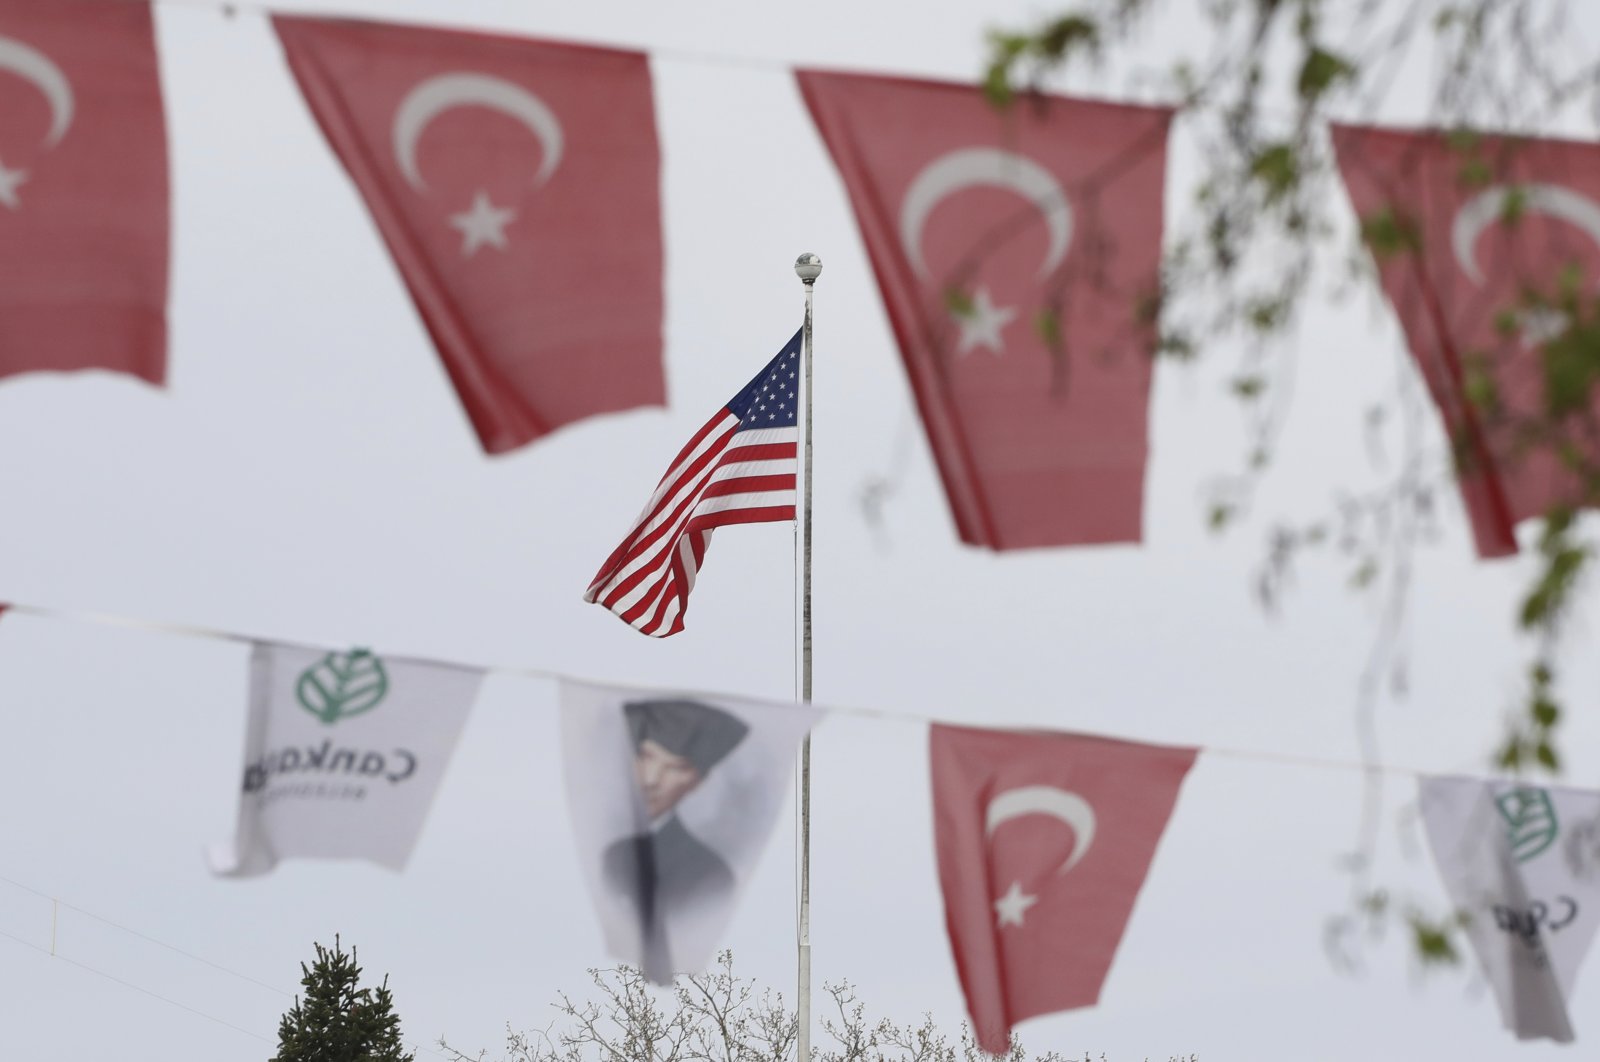 Turkish flags and banners depicting Mustafa Kemal Atatürk, the founder of modern Turkey, decorate a street outside the United States Embassy in Ankara, Turkey, April 25, 2021. (AP)